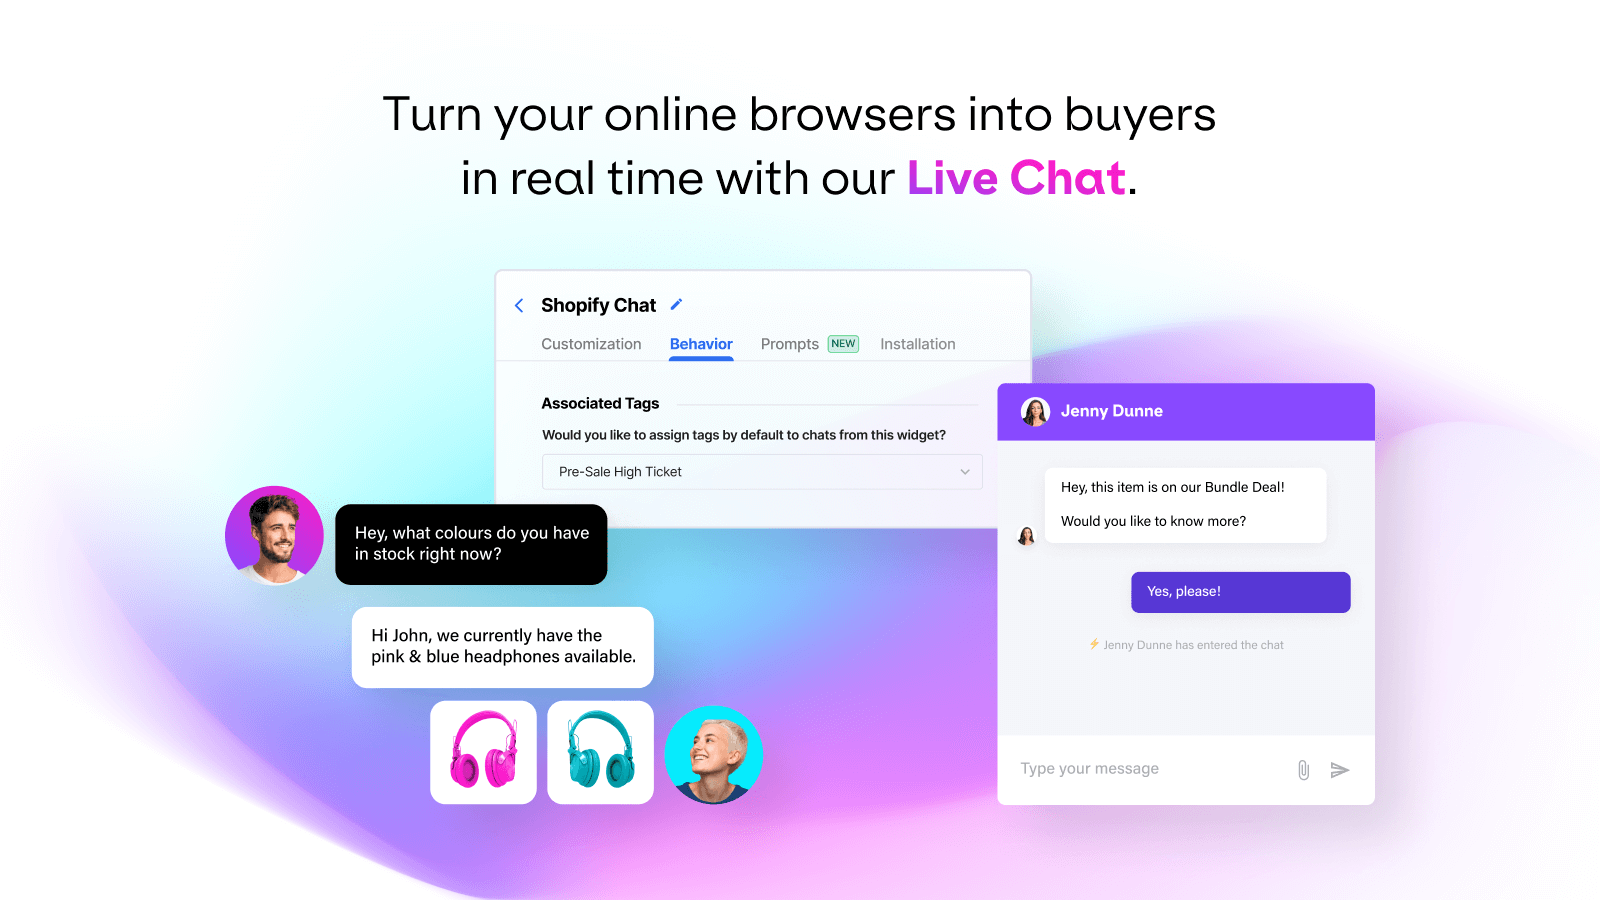 Free Live Chat